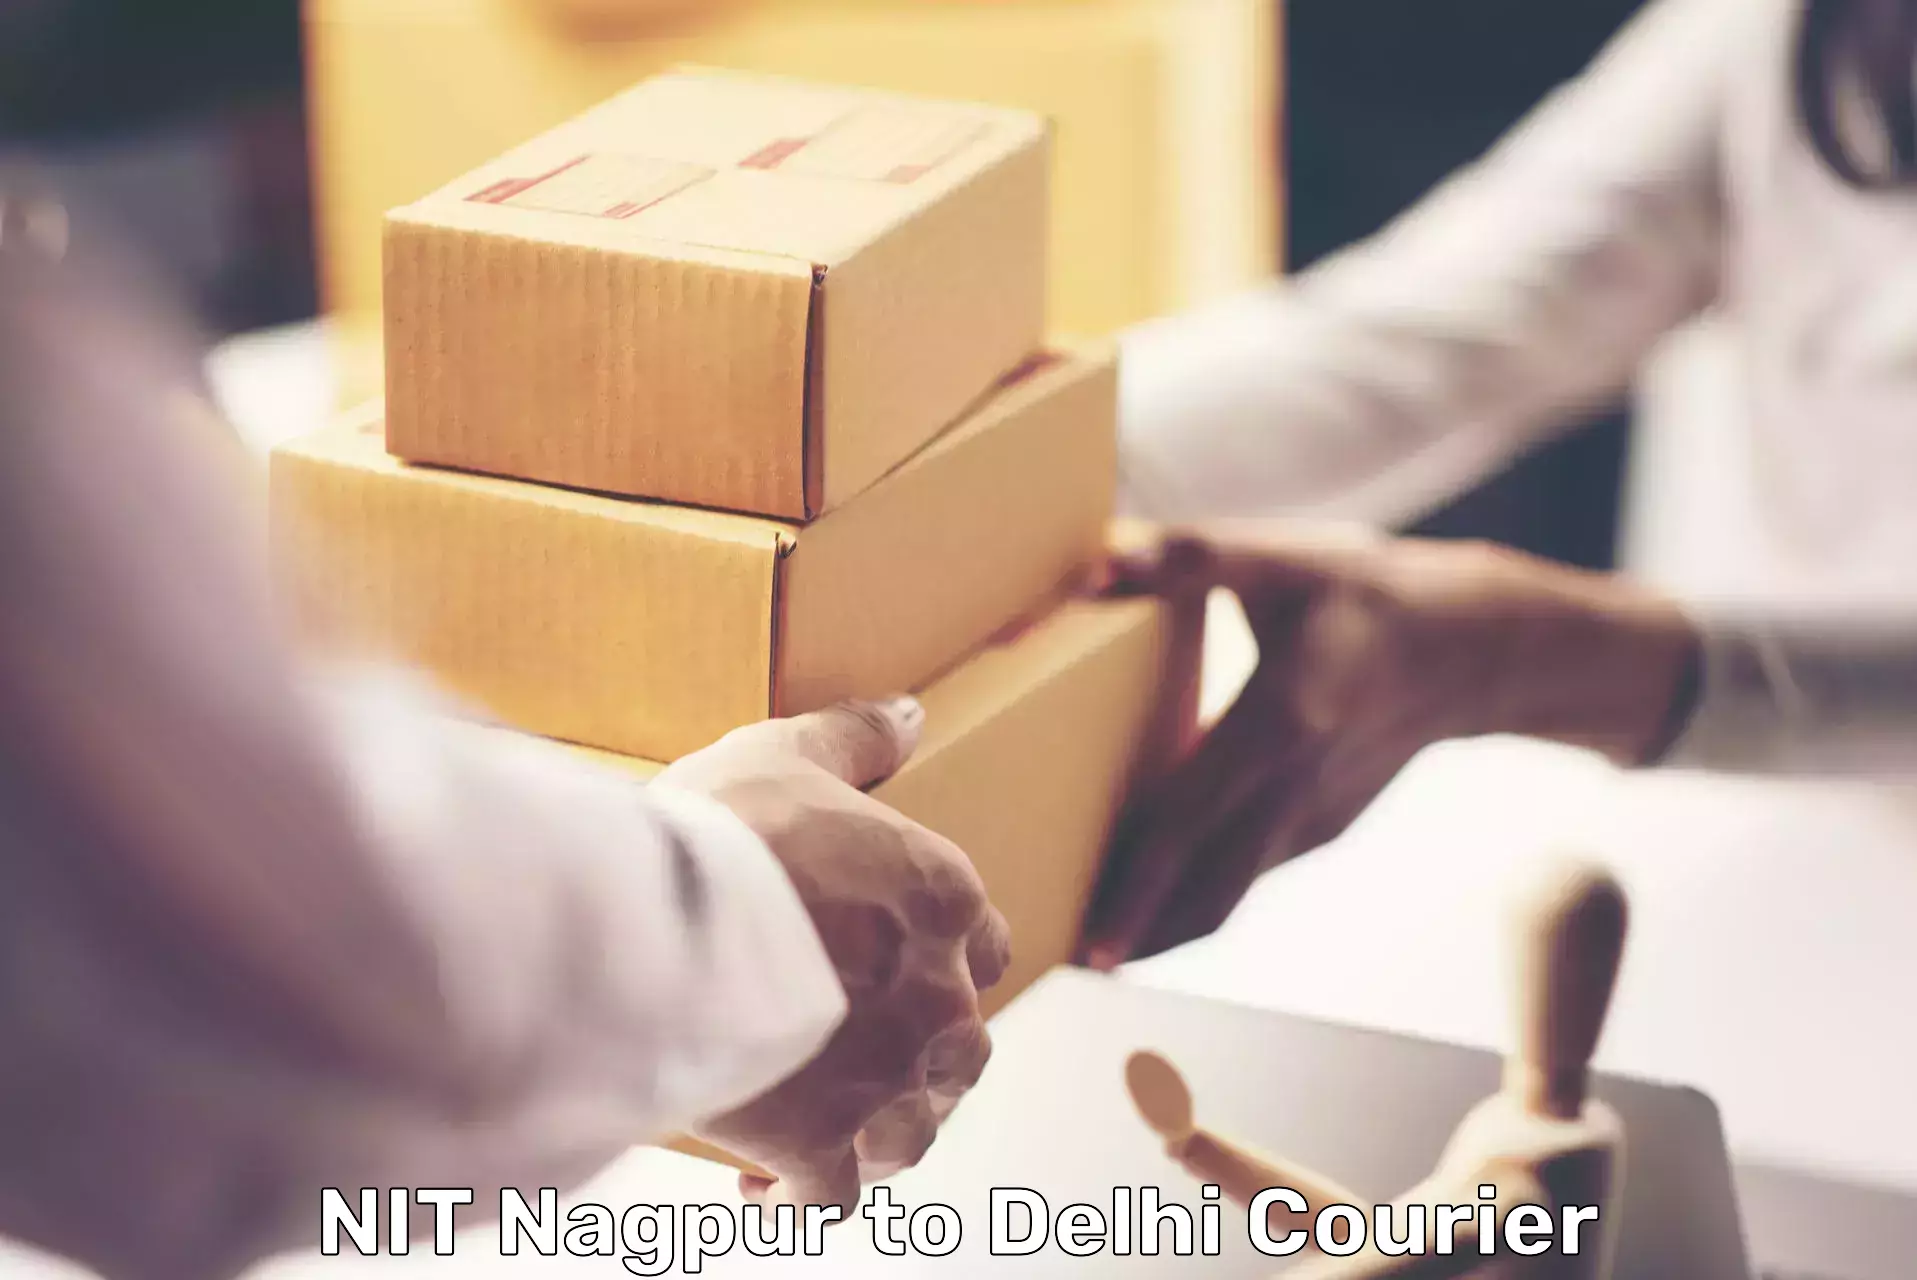 Fast shipping solutions NIT Nagpur to NCR